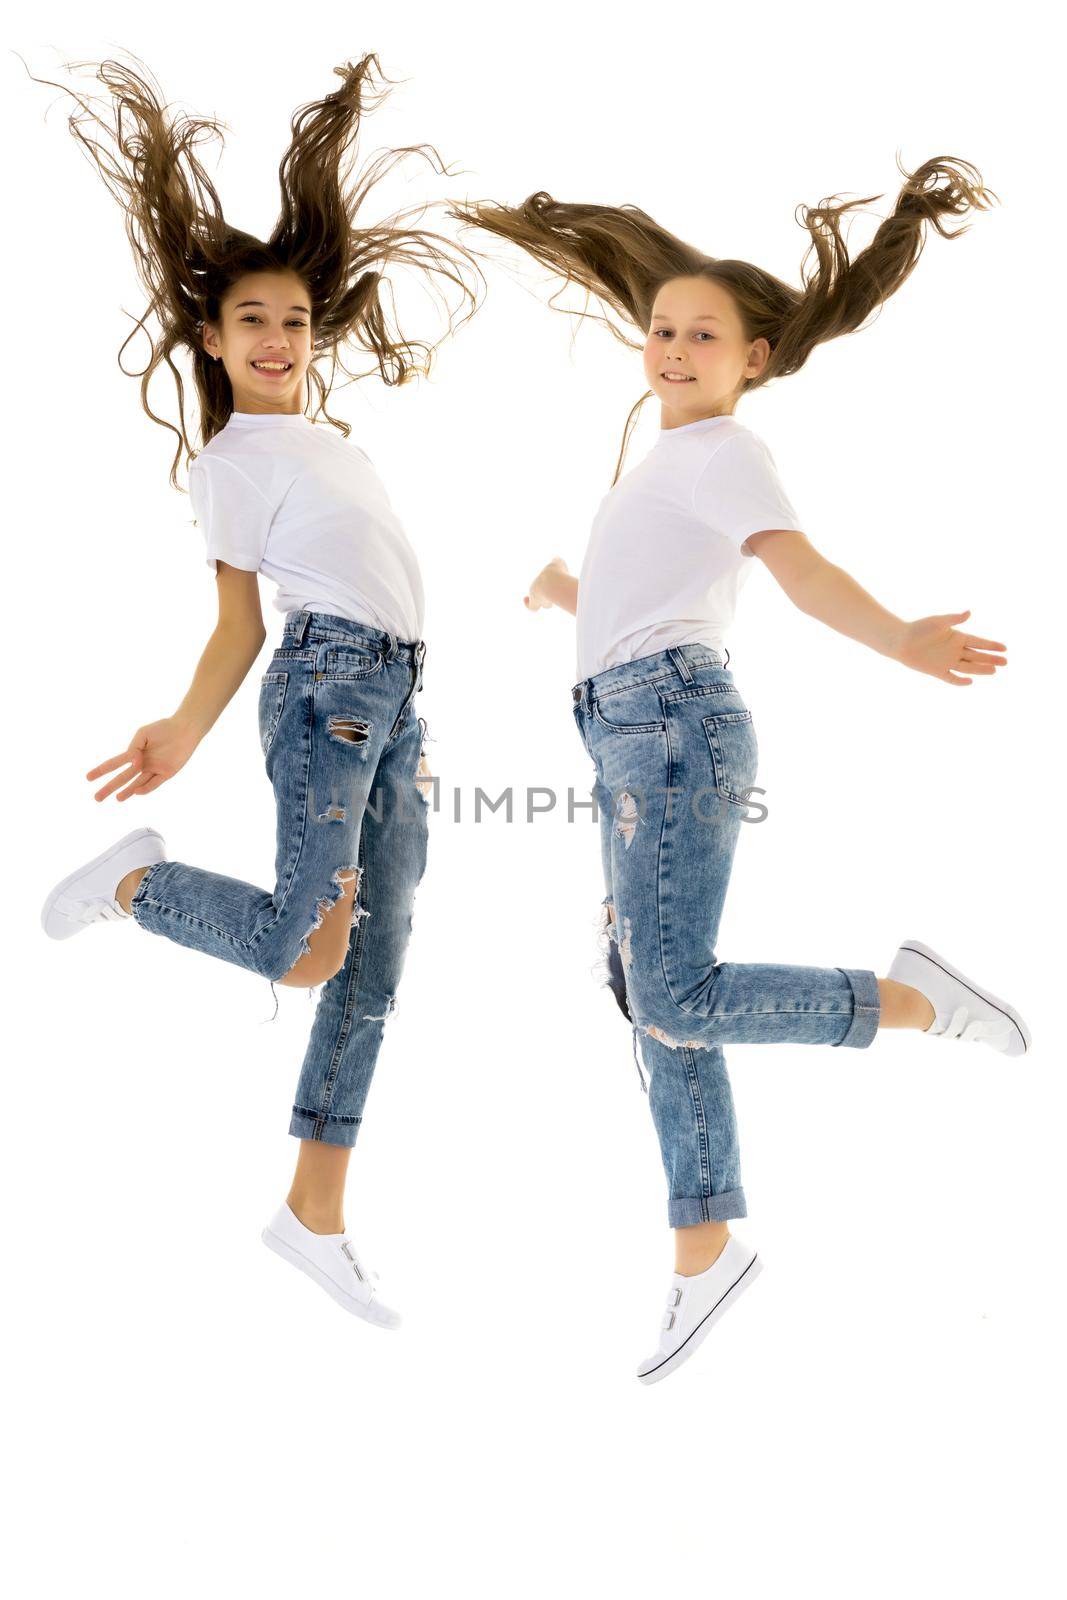 Two happy children jumping at once on a white background by kolesnikov_studio